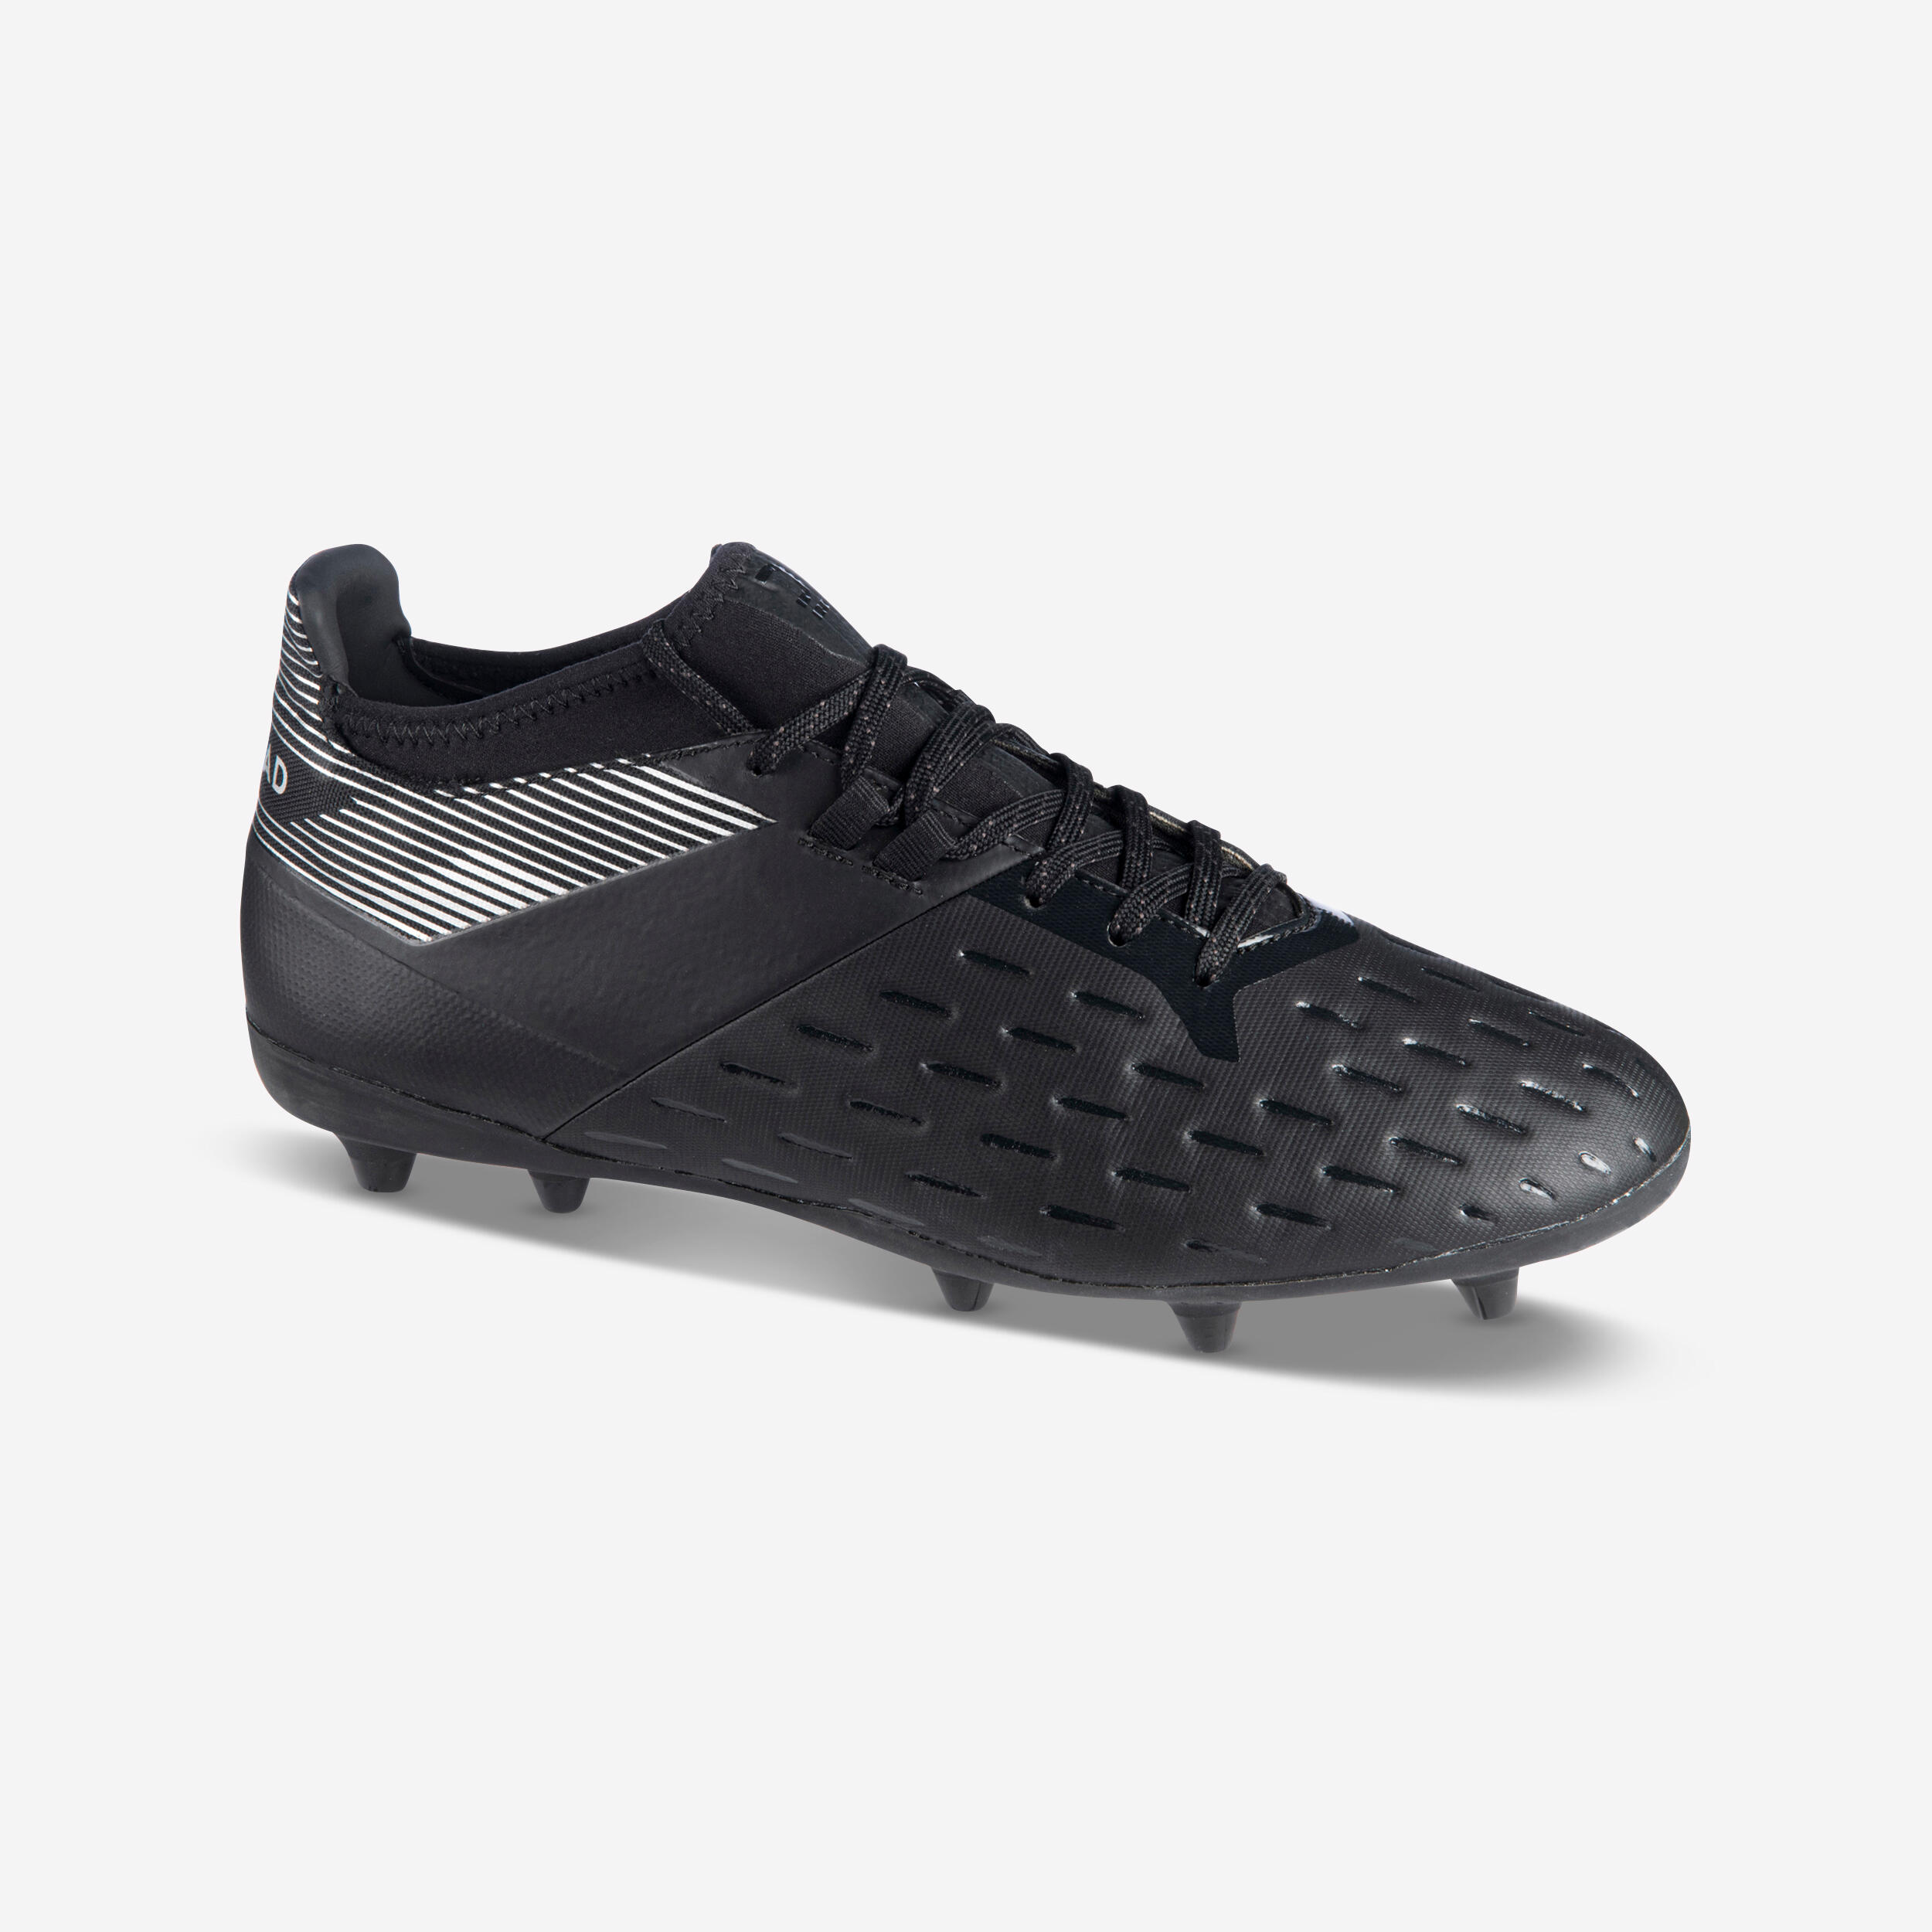 OFFLOAD Adult Dry Artificial Pitch Moulded Rugby Boots Advance 500 - Black/Grey